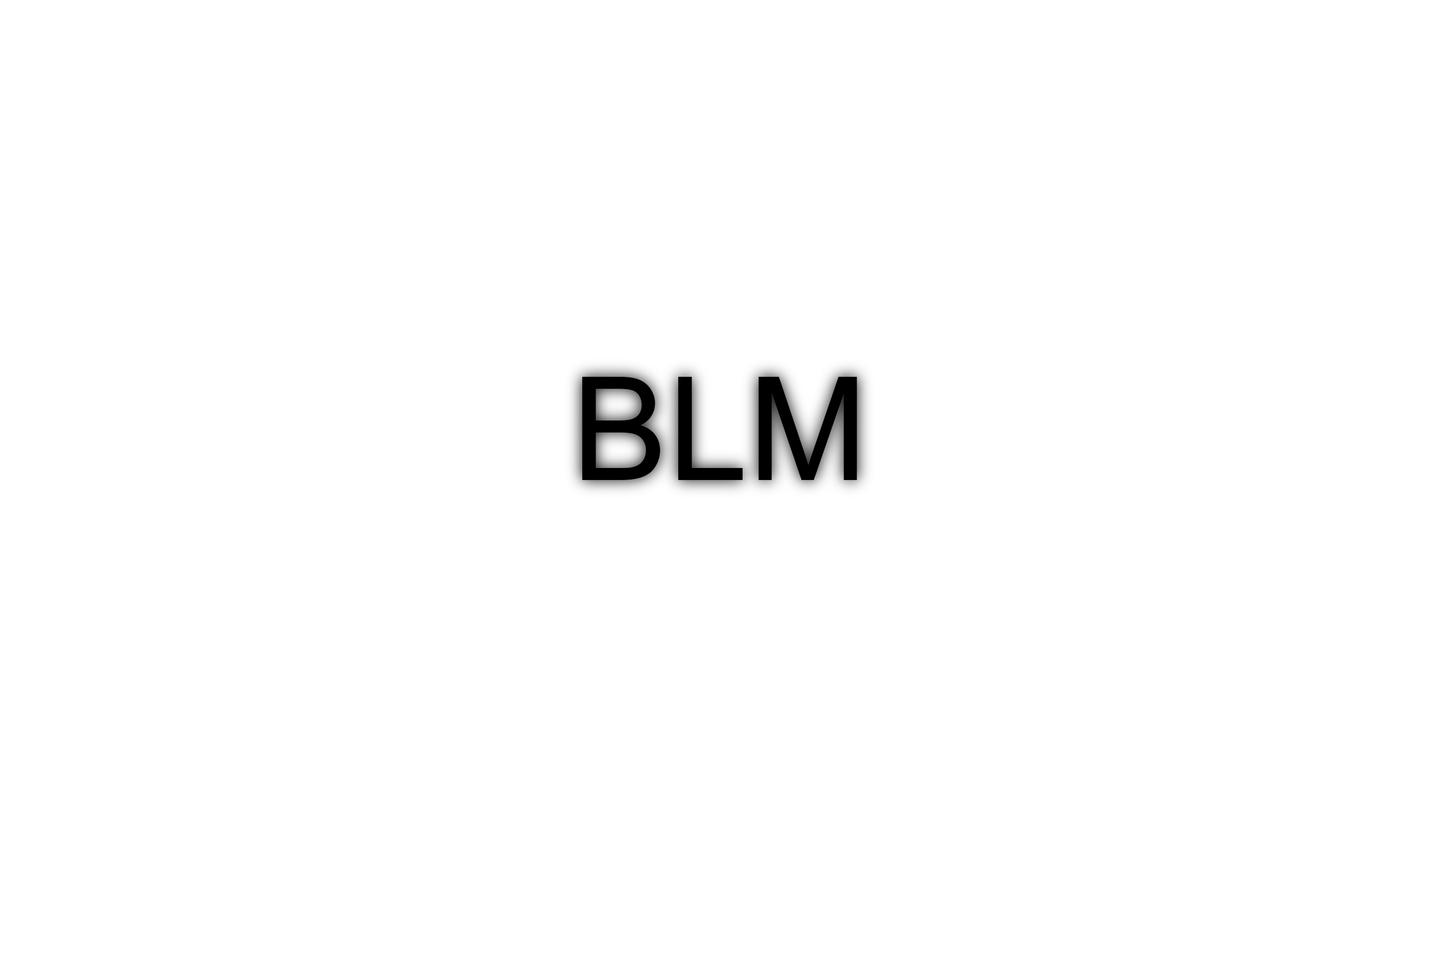 BLM Test ImageThis is just a test image.